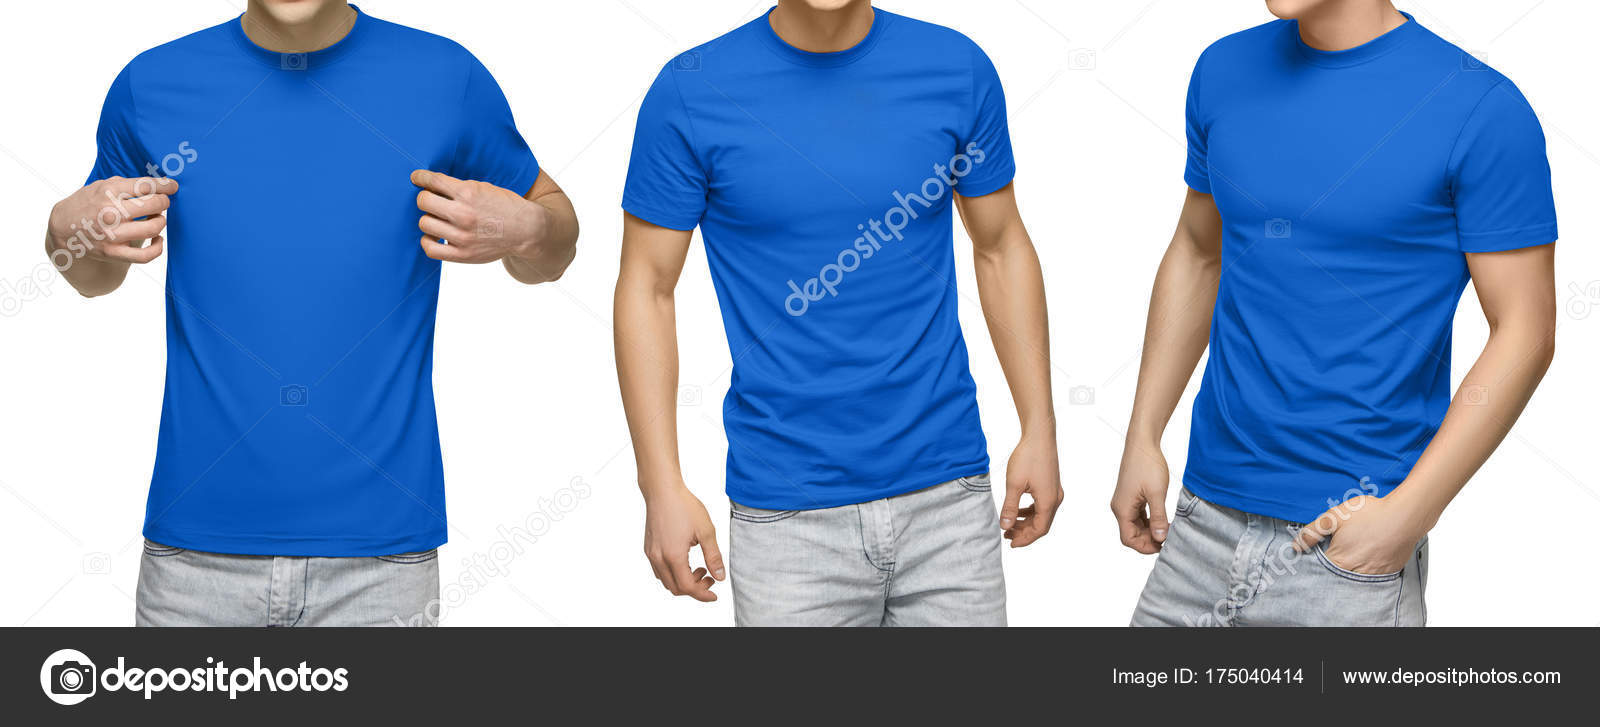 Download Young Male In Blank Blue T Shirt Front And Back View Isolated White Background With Clipping Path Design Men Tshirt Template And Mockup For Print Stock Photo Image By C Ra33 175040414